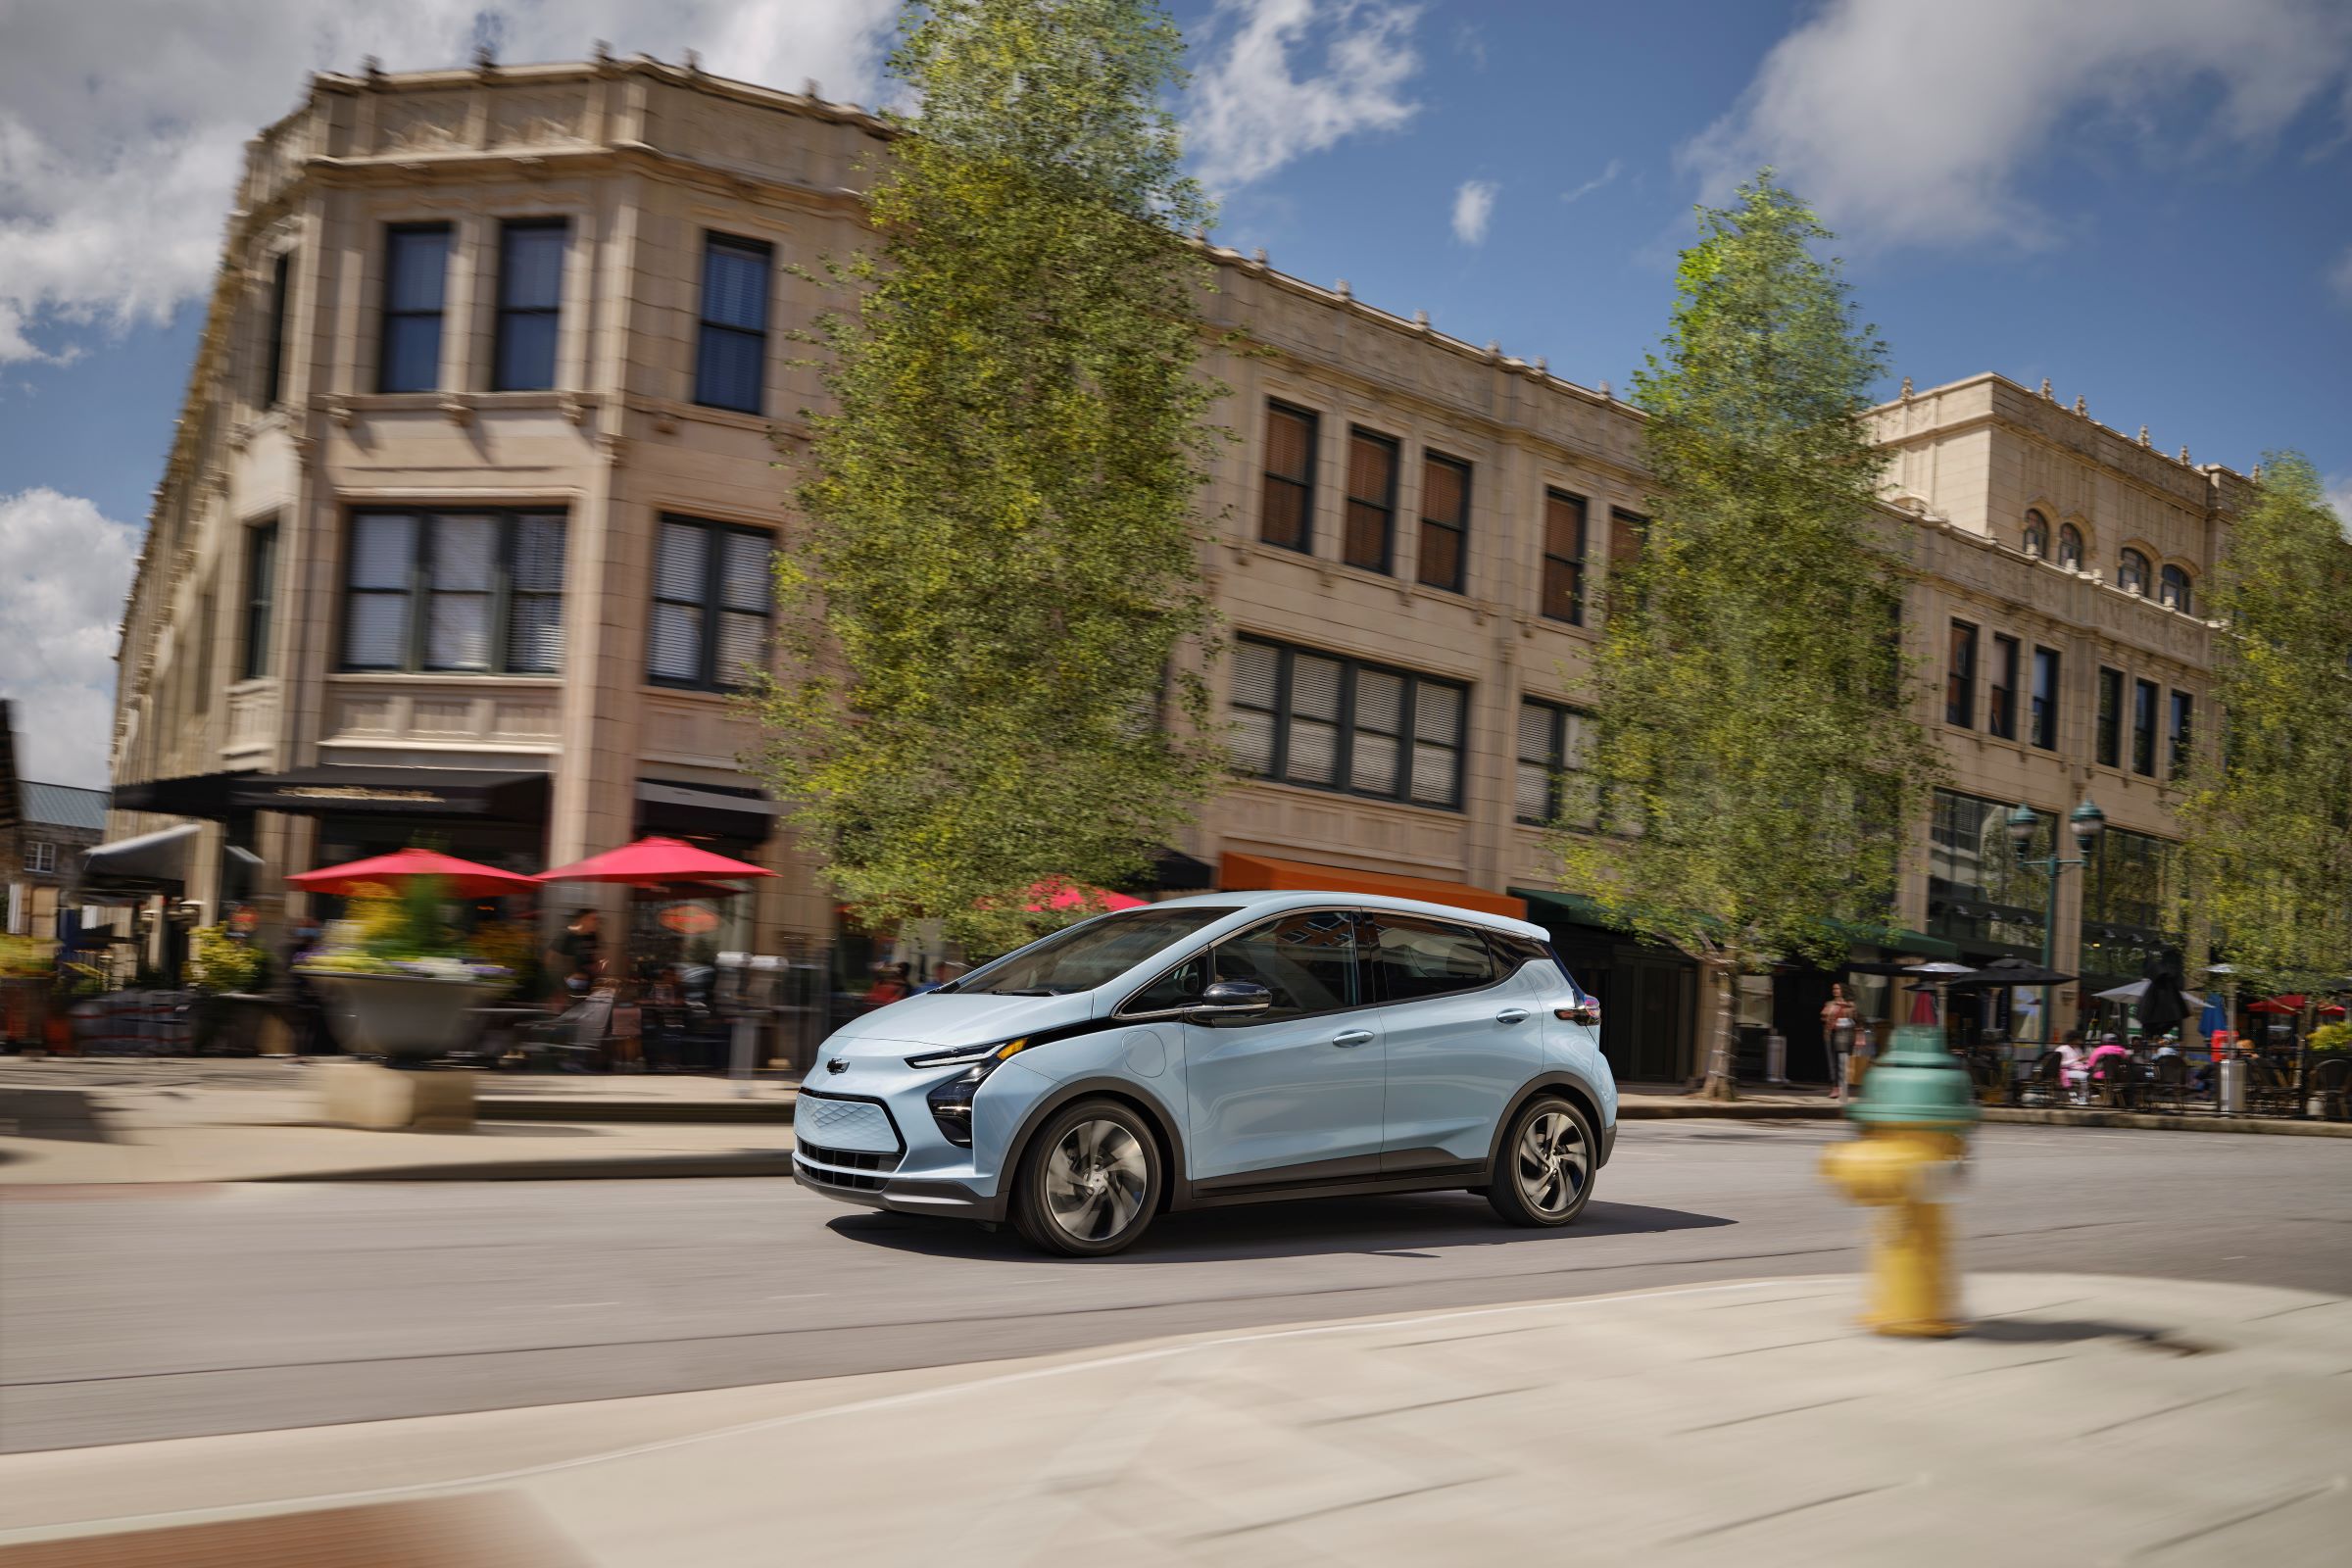 2023 Chevy Bolt driving on the street